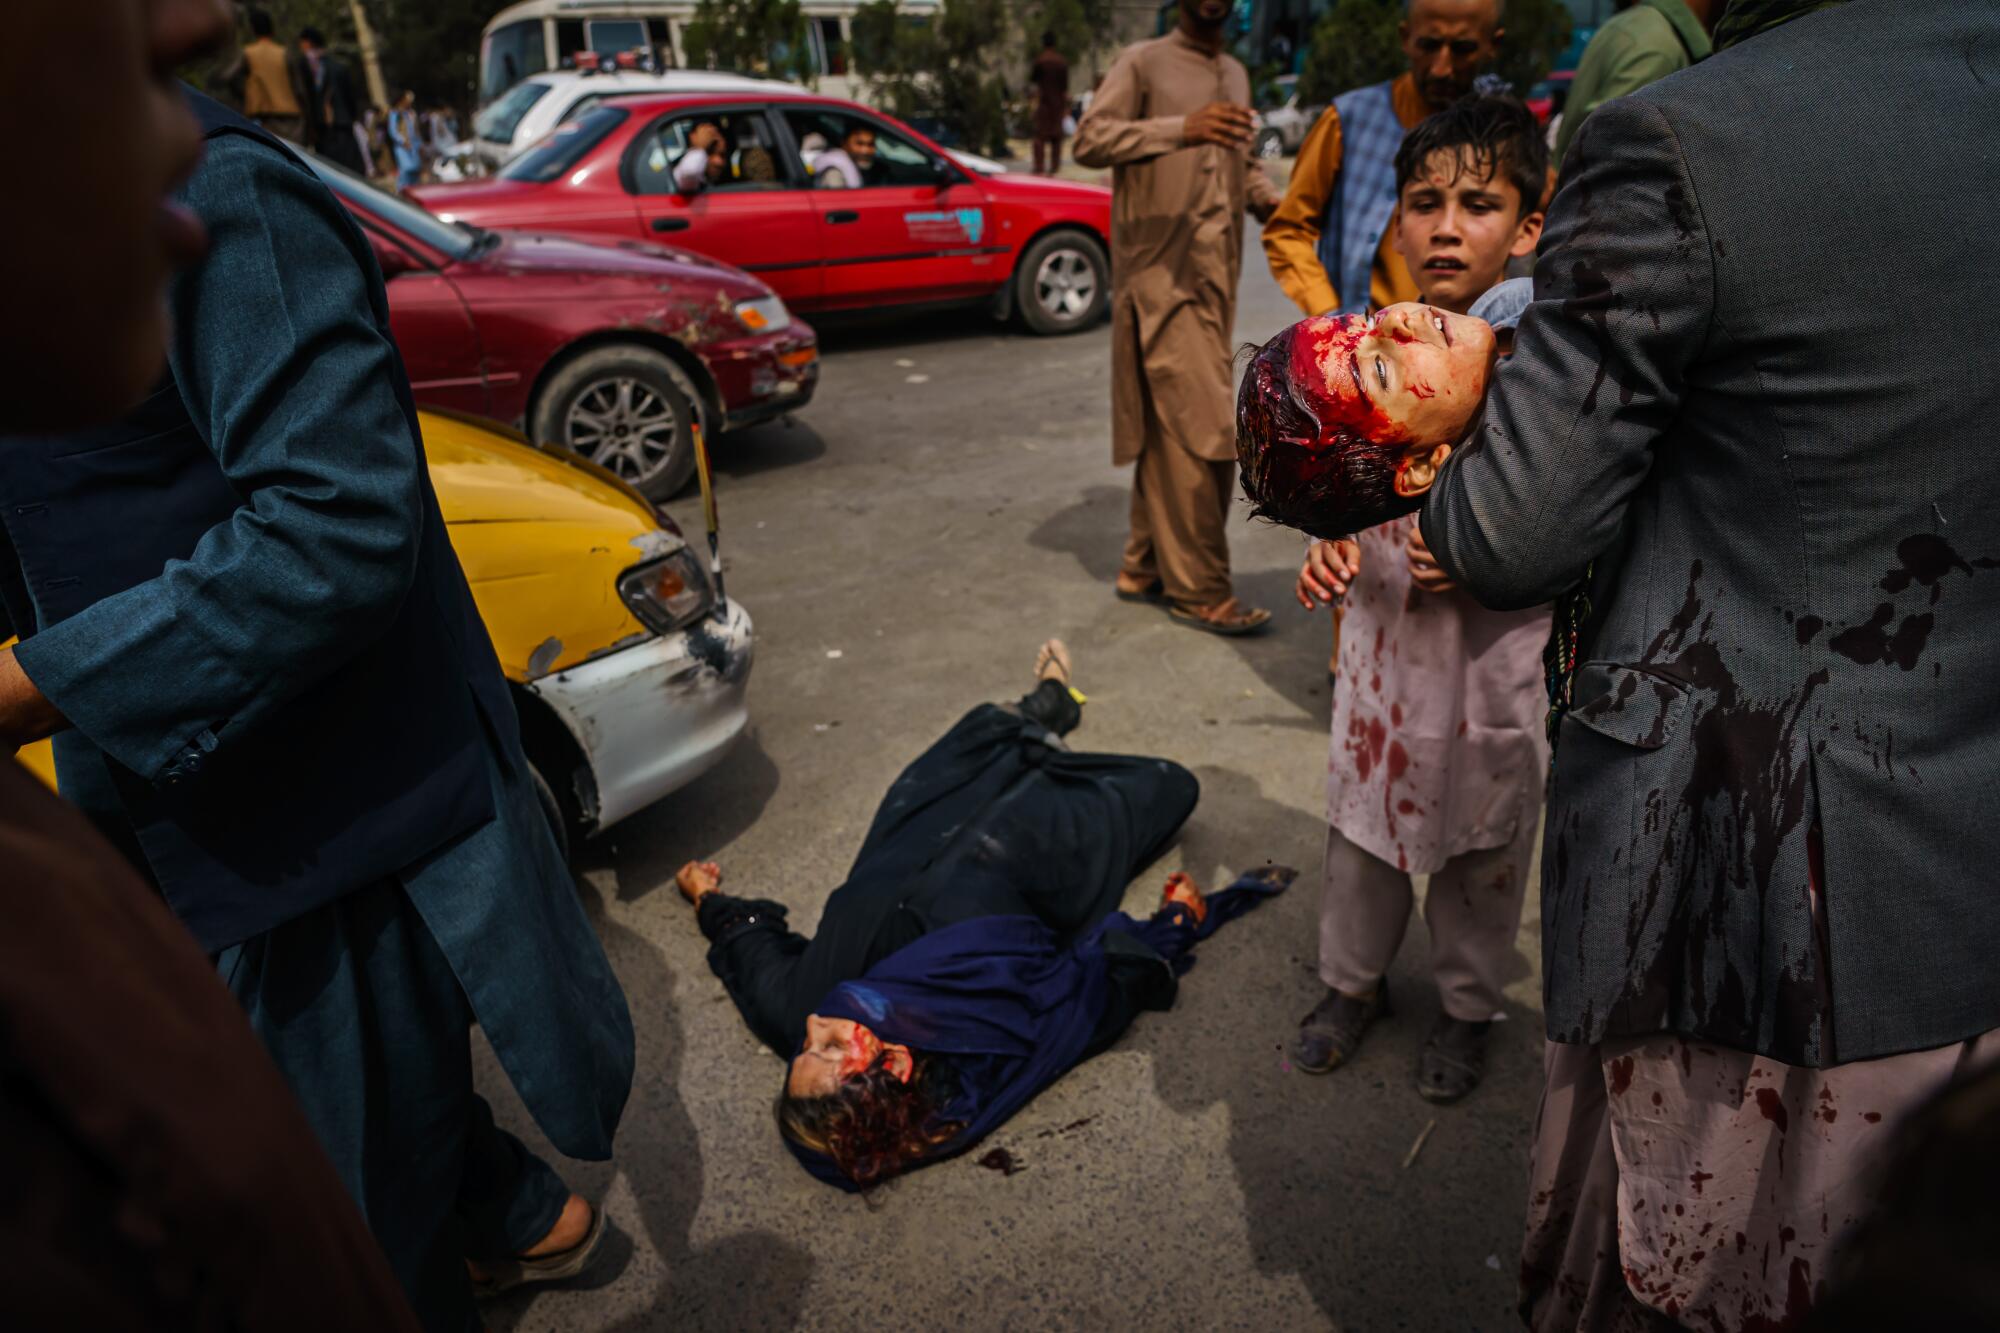 A man carries a bloodied child as a woman lies wounded on the street.